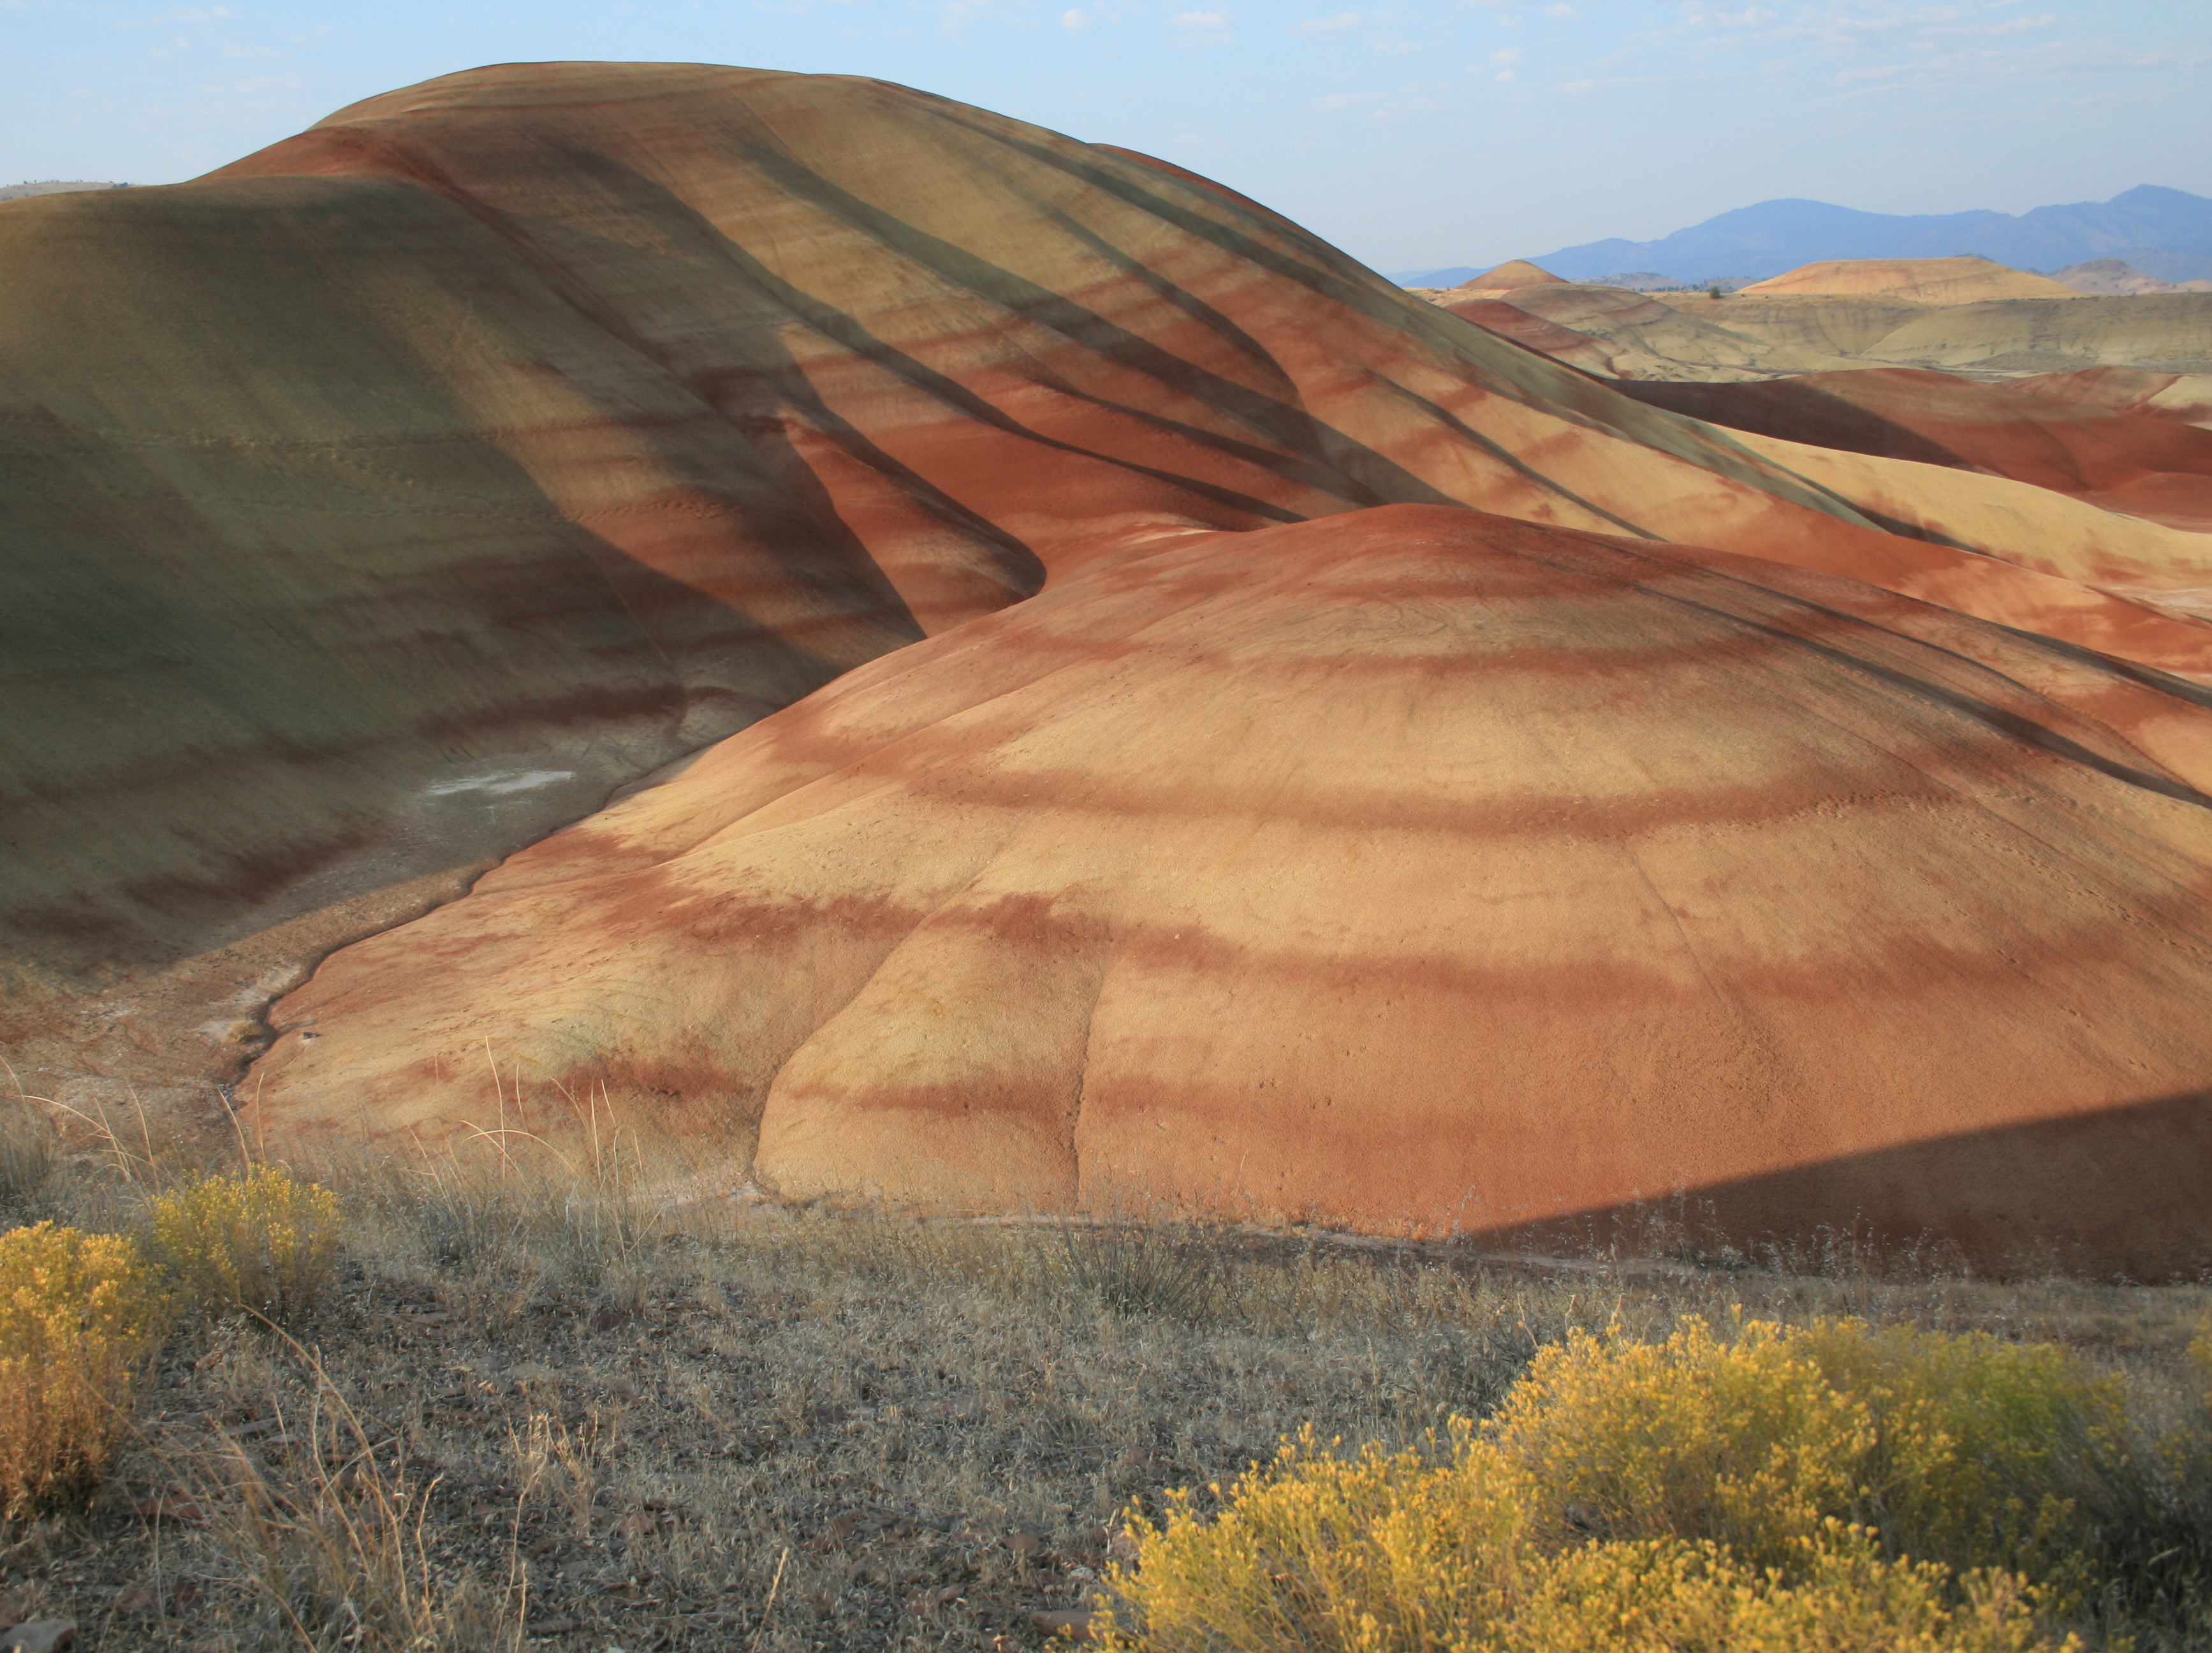 Painted Hills Unit - John Day Fossil Beds National Monument (U.S.